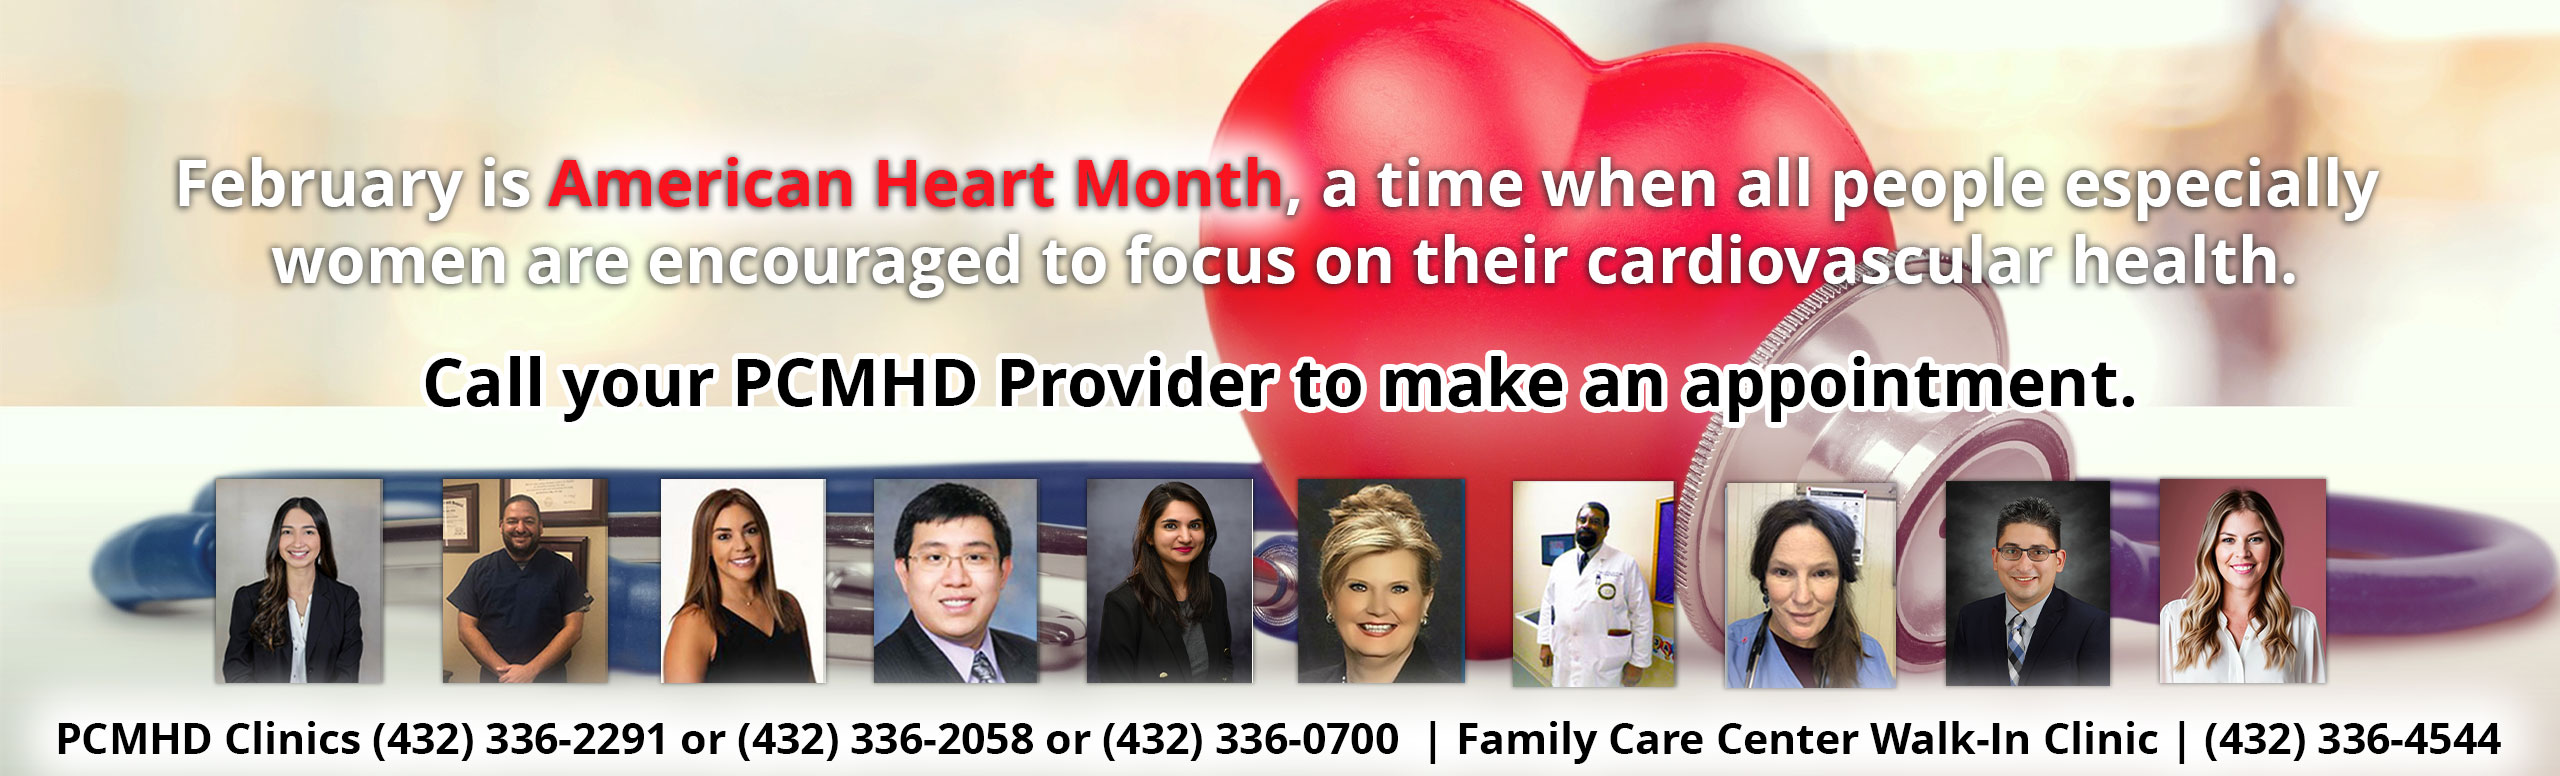 February is American Heart Month, a time when all people—especially women—are encouraged to focus on their cardiovascular health.